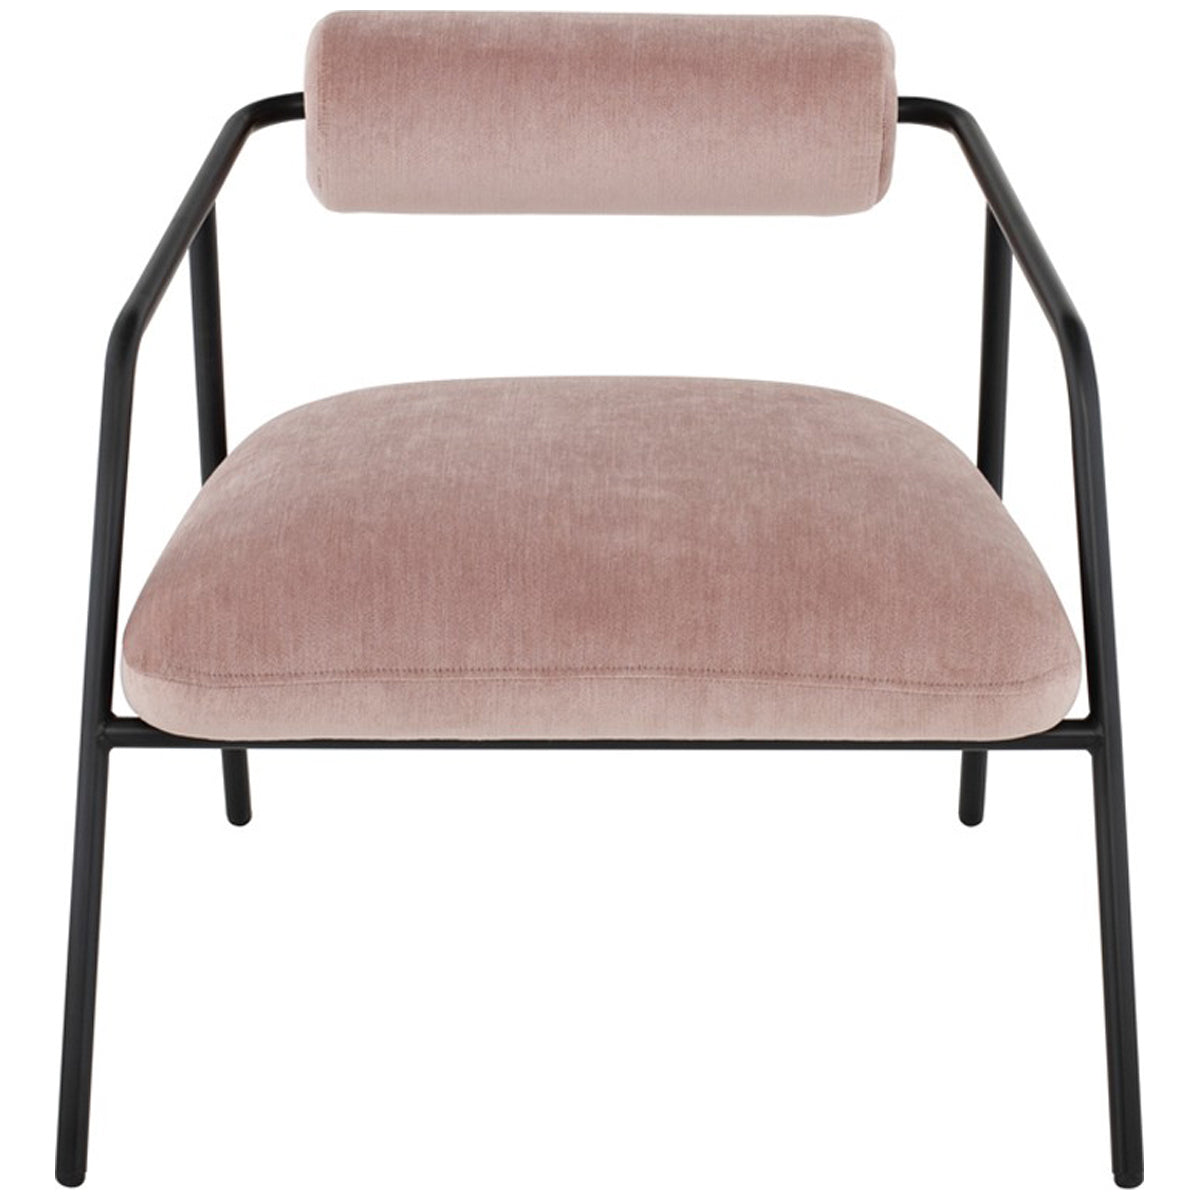 Nuevo Living Cyrus Occasional Chair